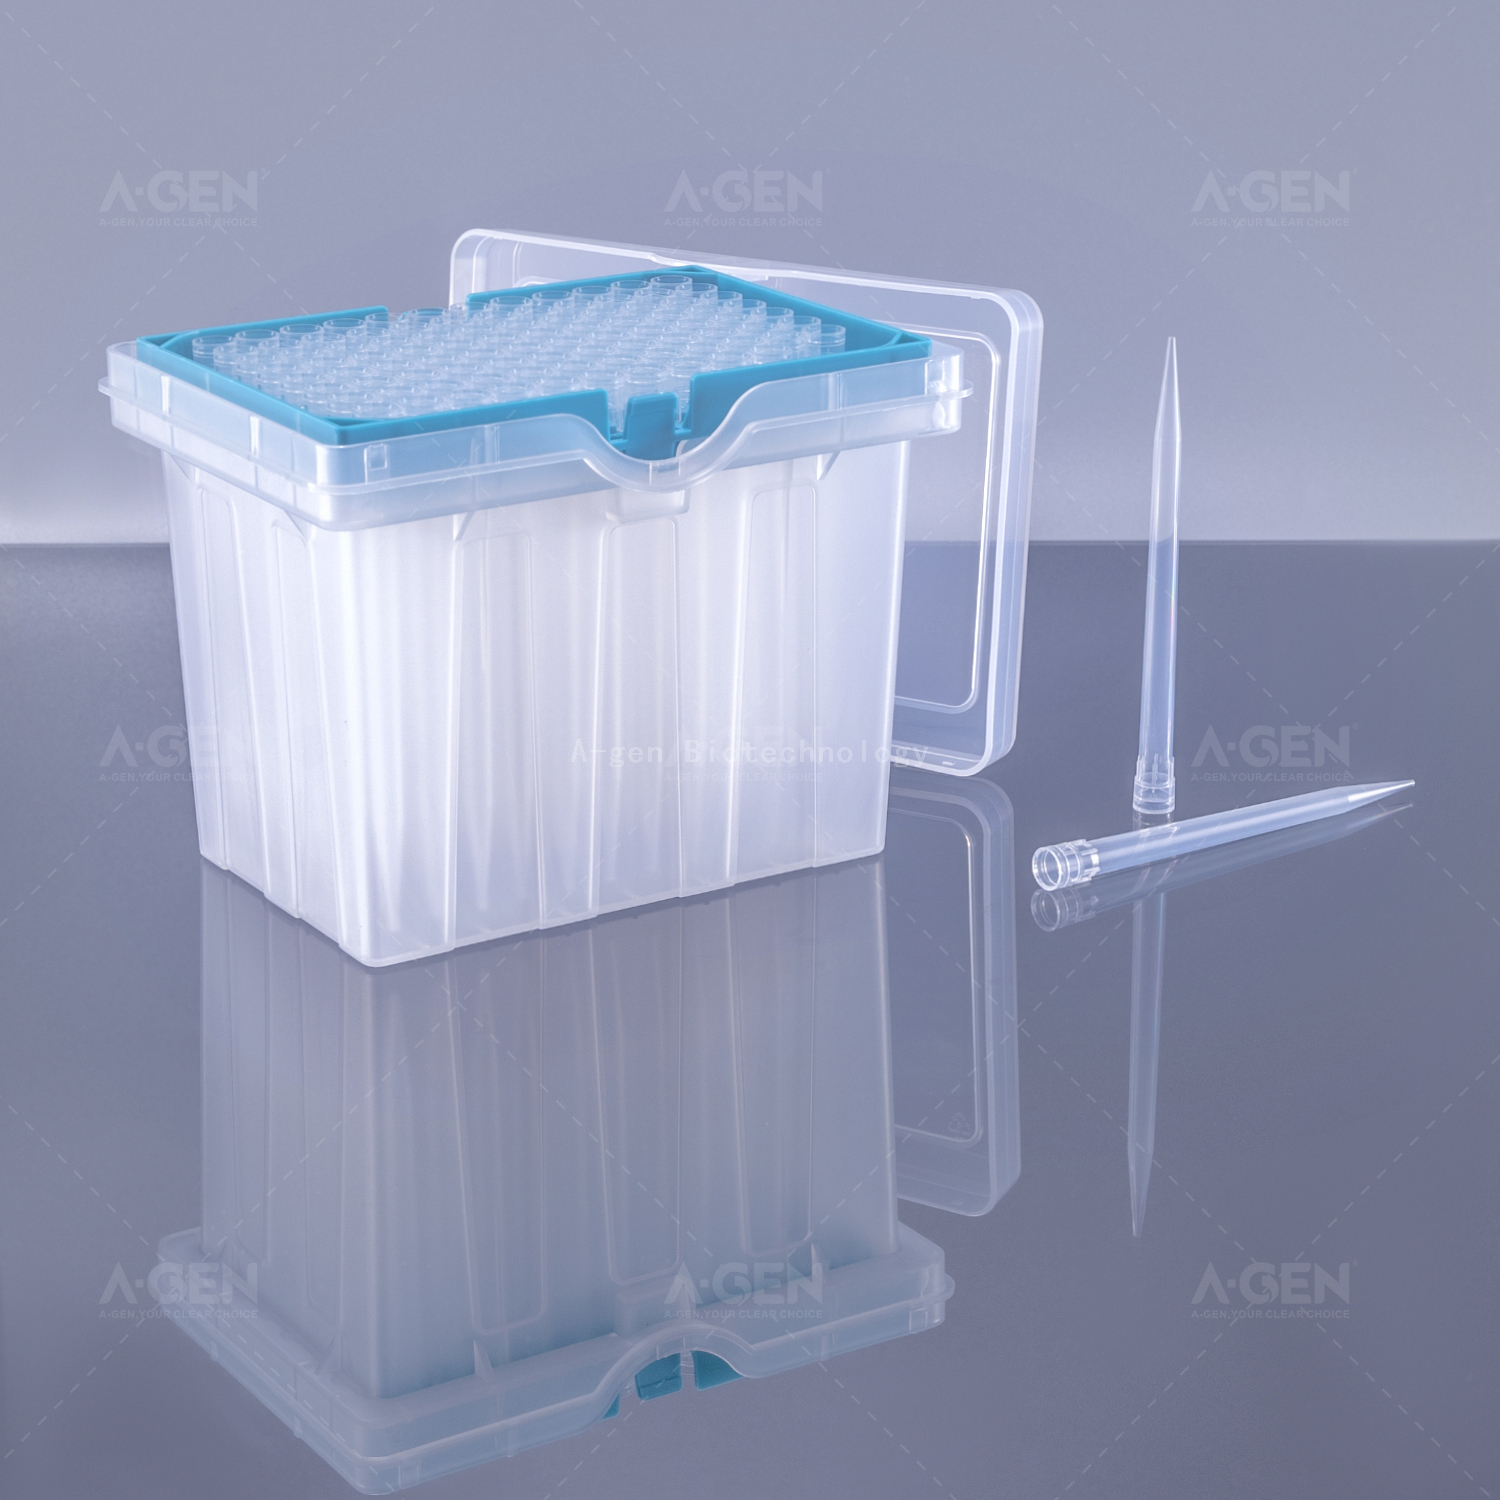 Low Retention Hamilton Pipette Tip 1000μL Sterile Clear PP Pipette Tip in Rack for Liquid Transfer Without Filter 